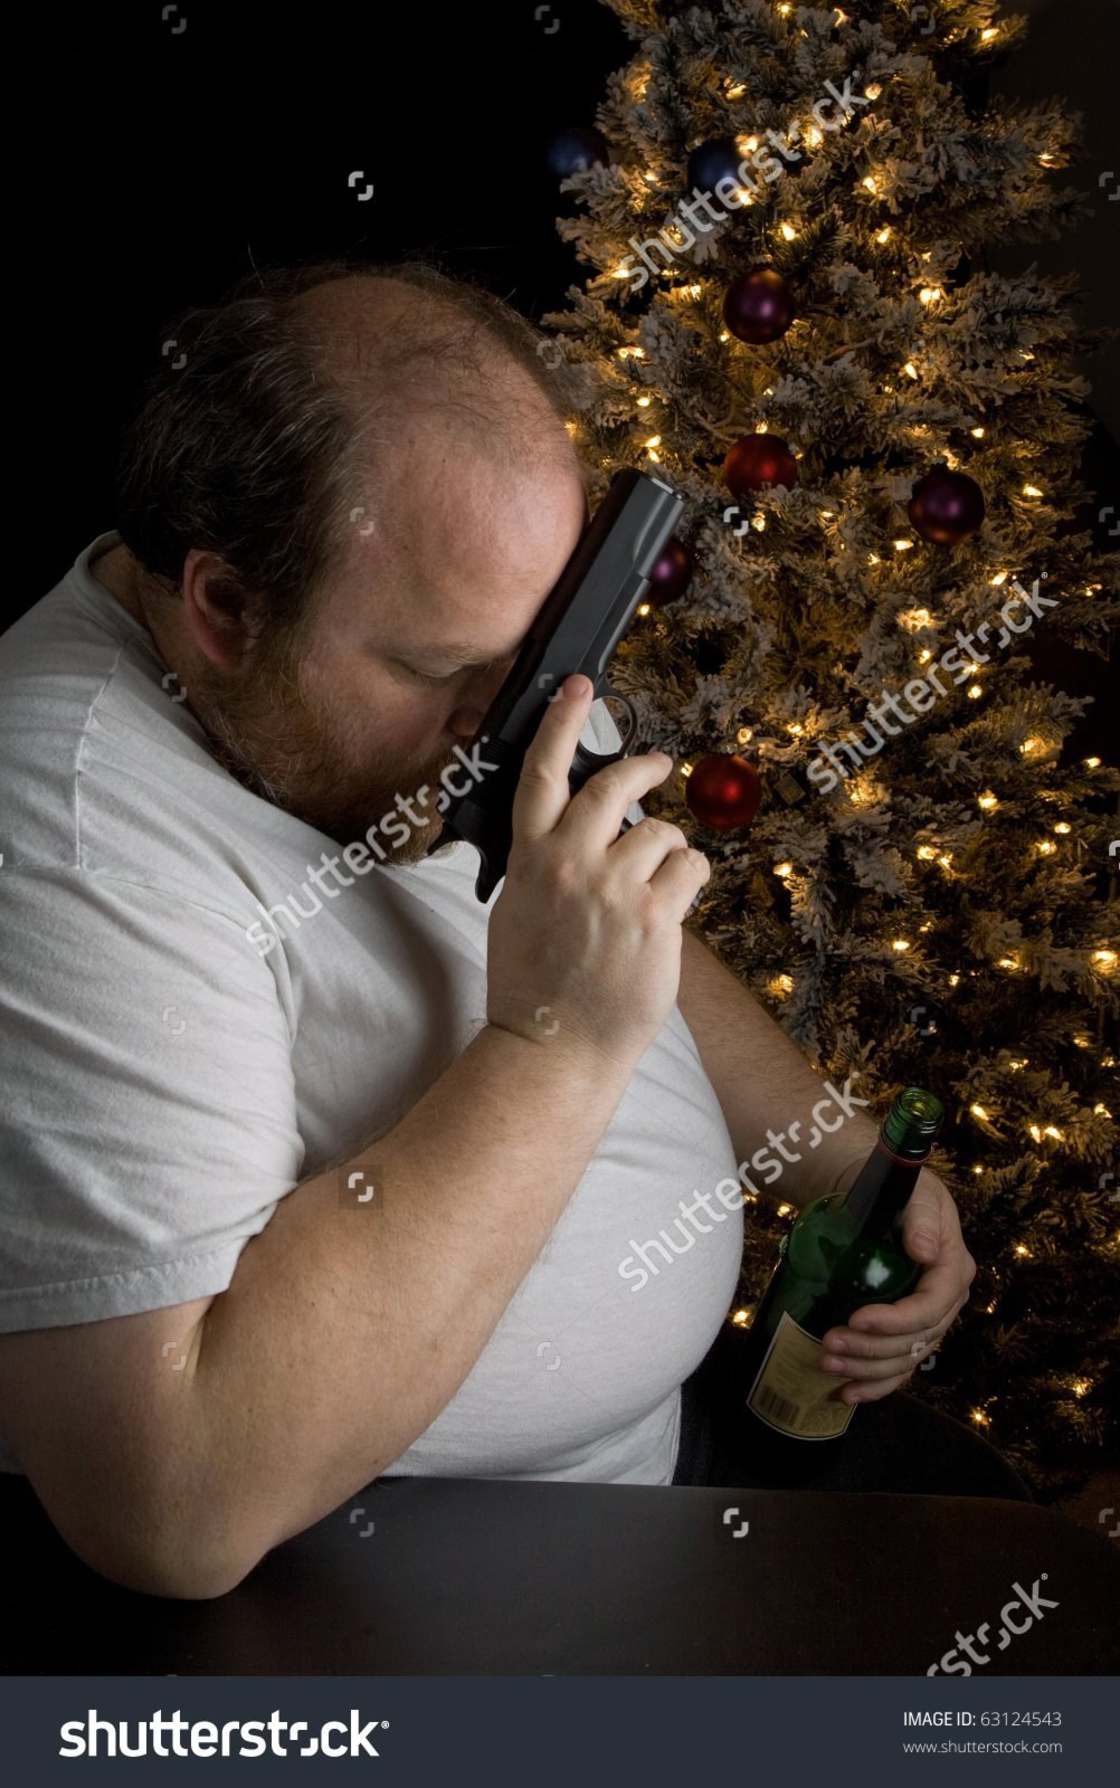 Fat man by a Christmas tree saying a prayer with a gun